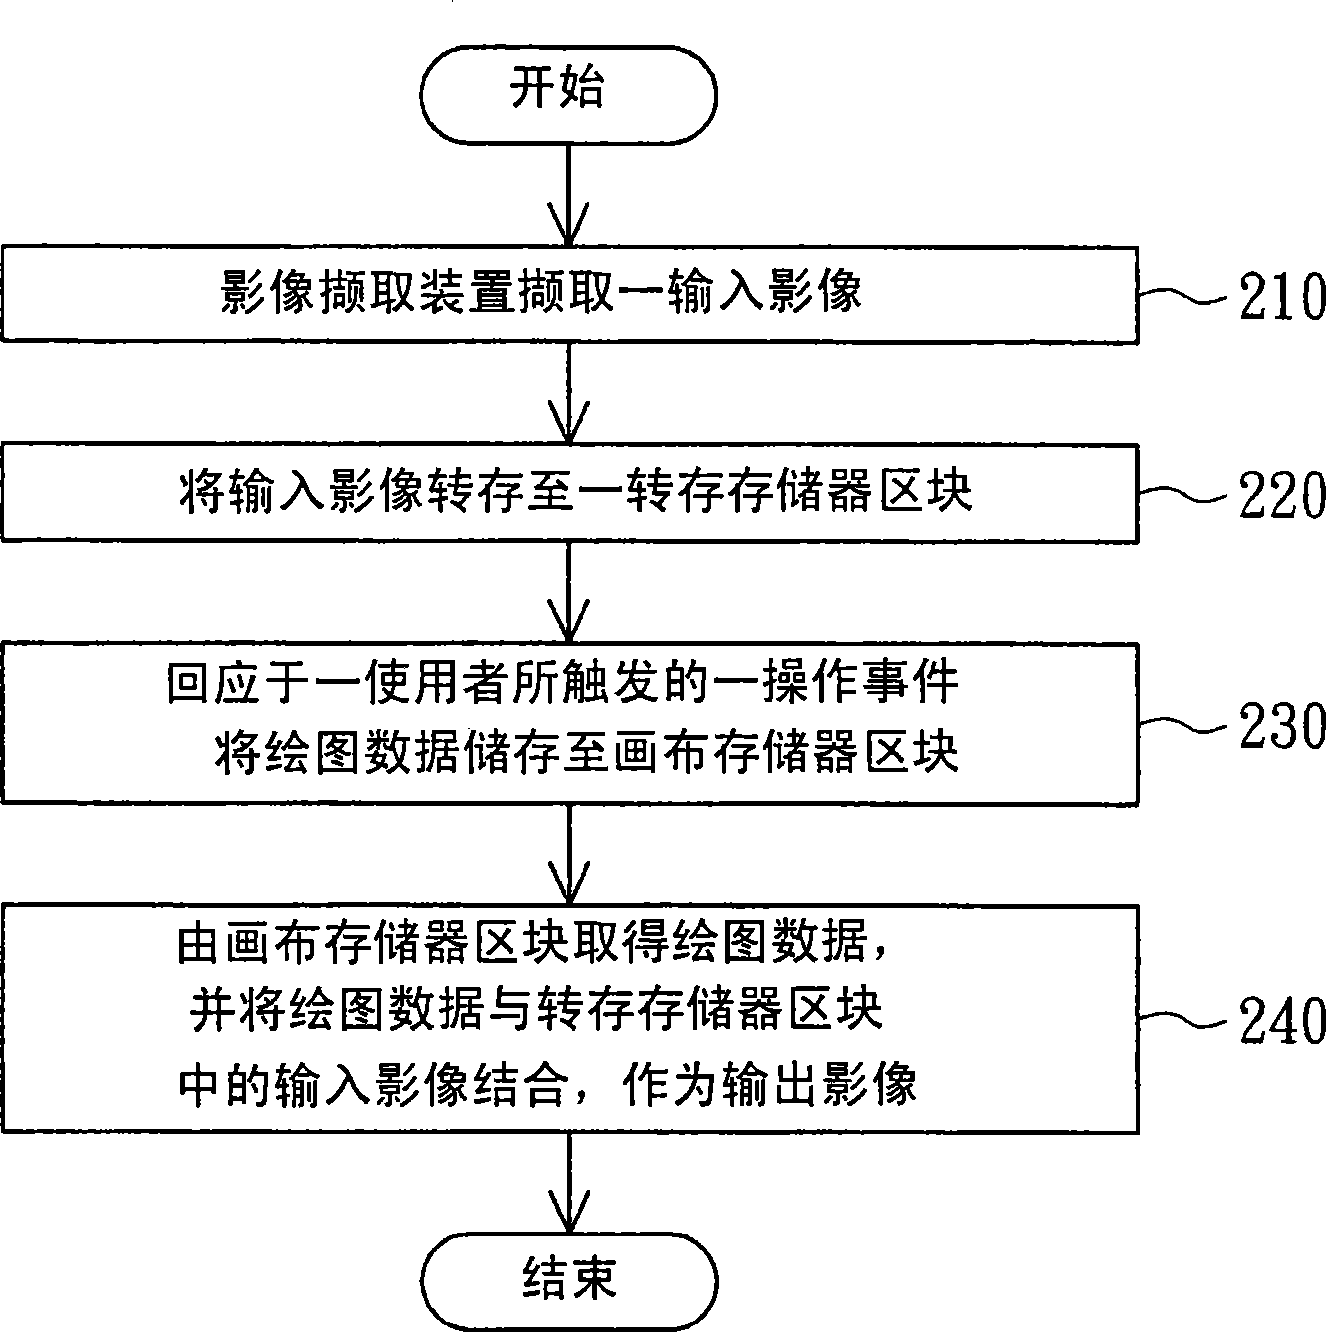 Image processing system and method thereof applied with instant messaging program